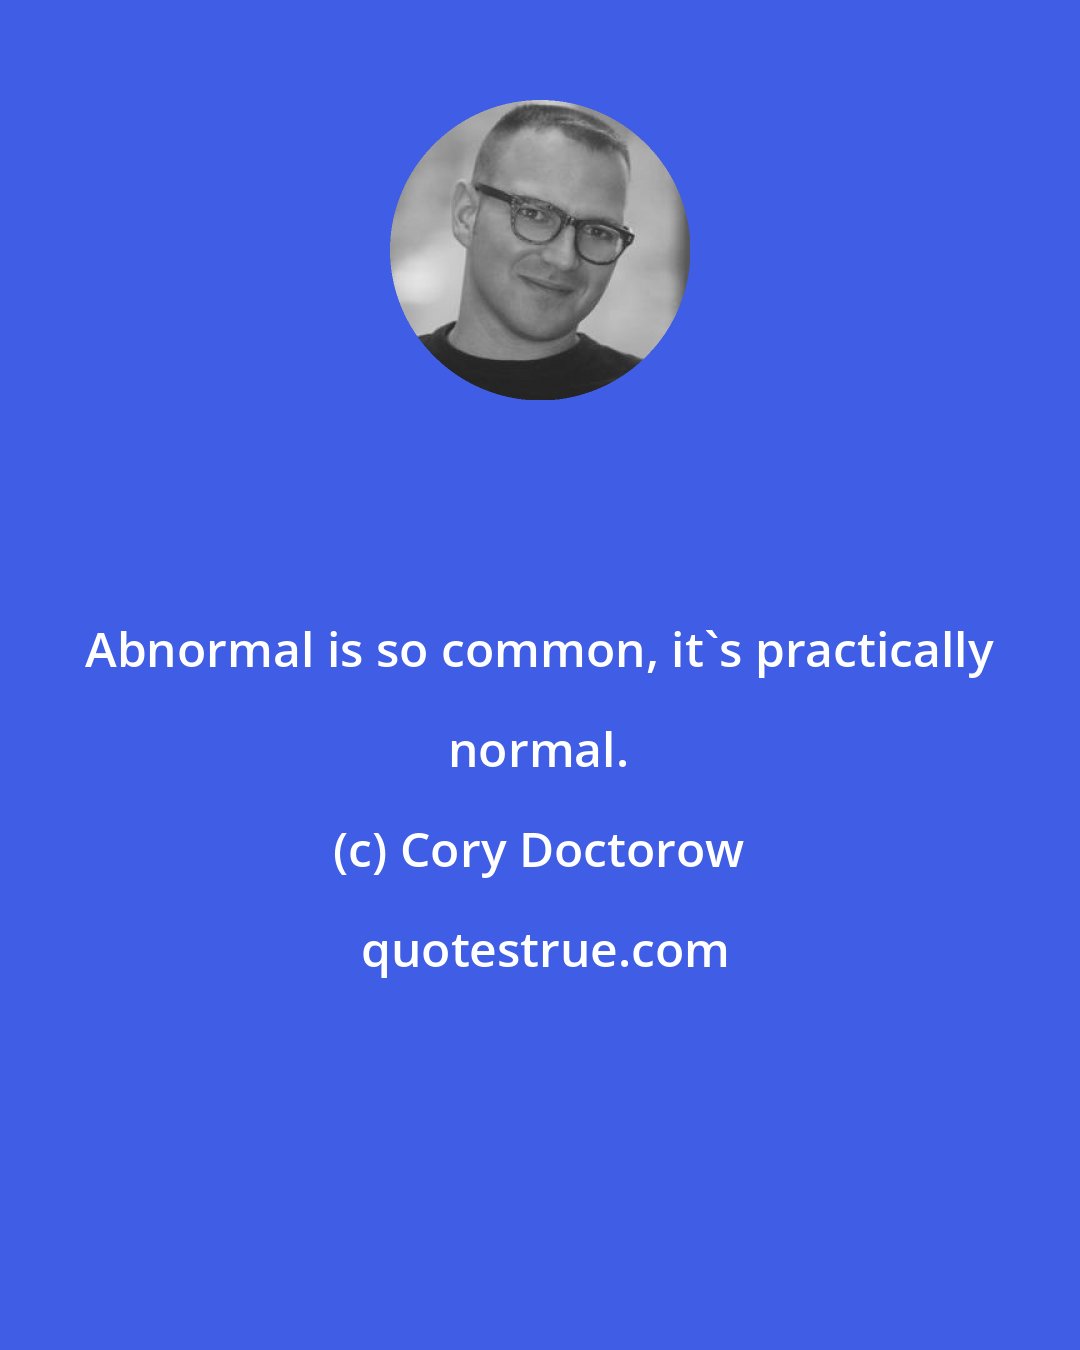 Cory Doctorow: Abnormal is so common, it's practically normal.